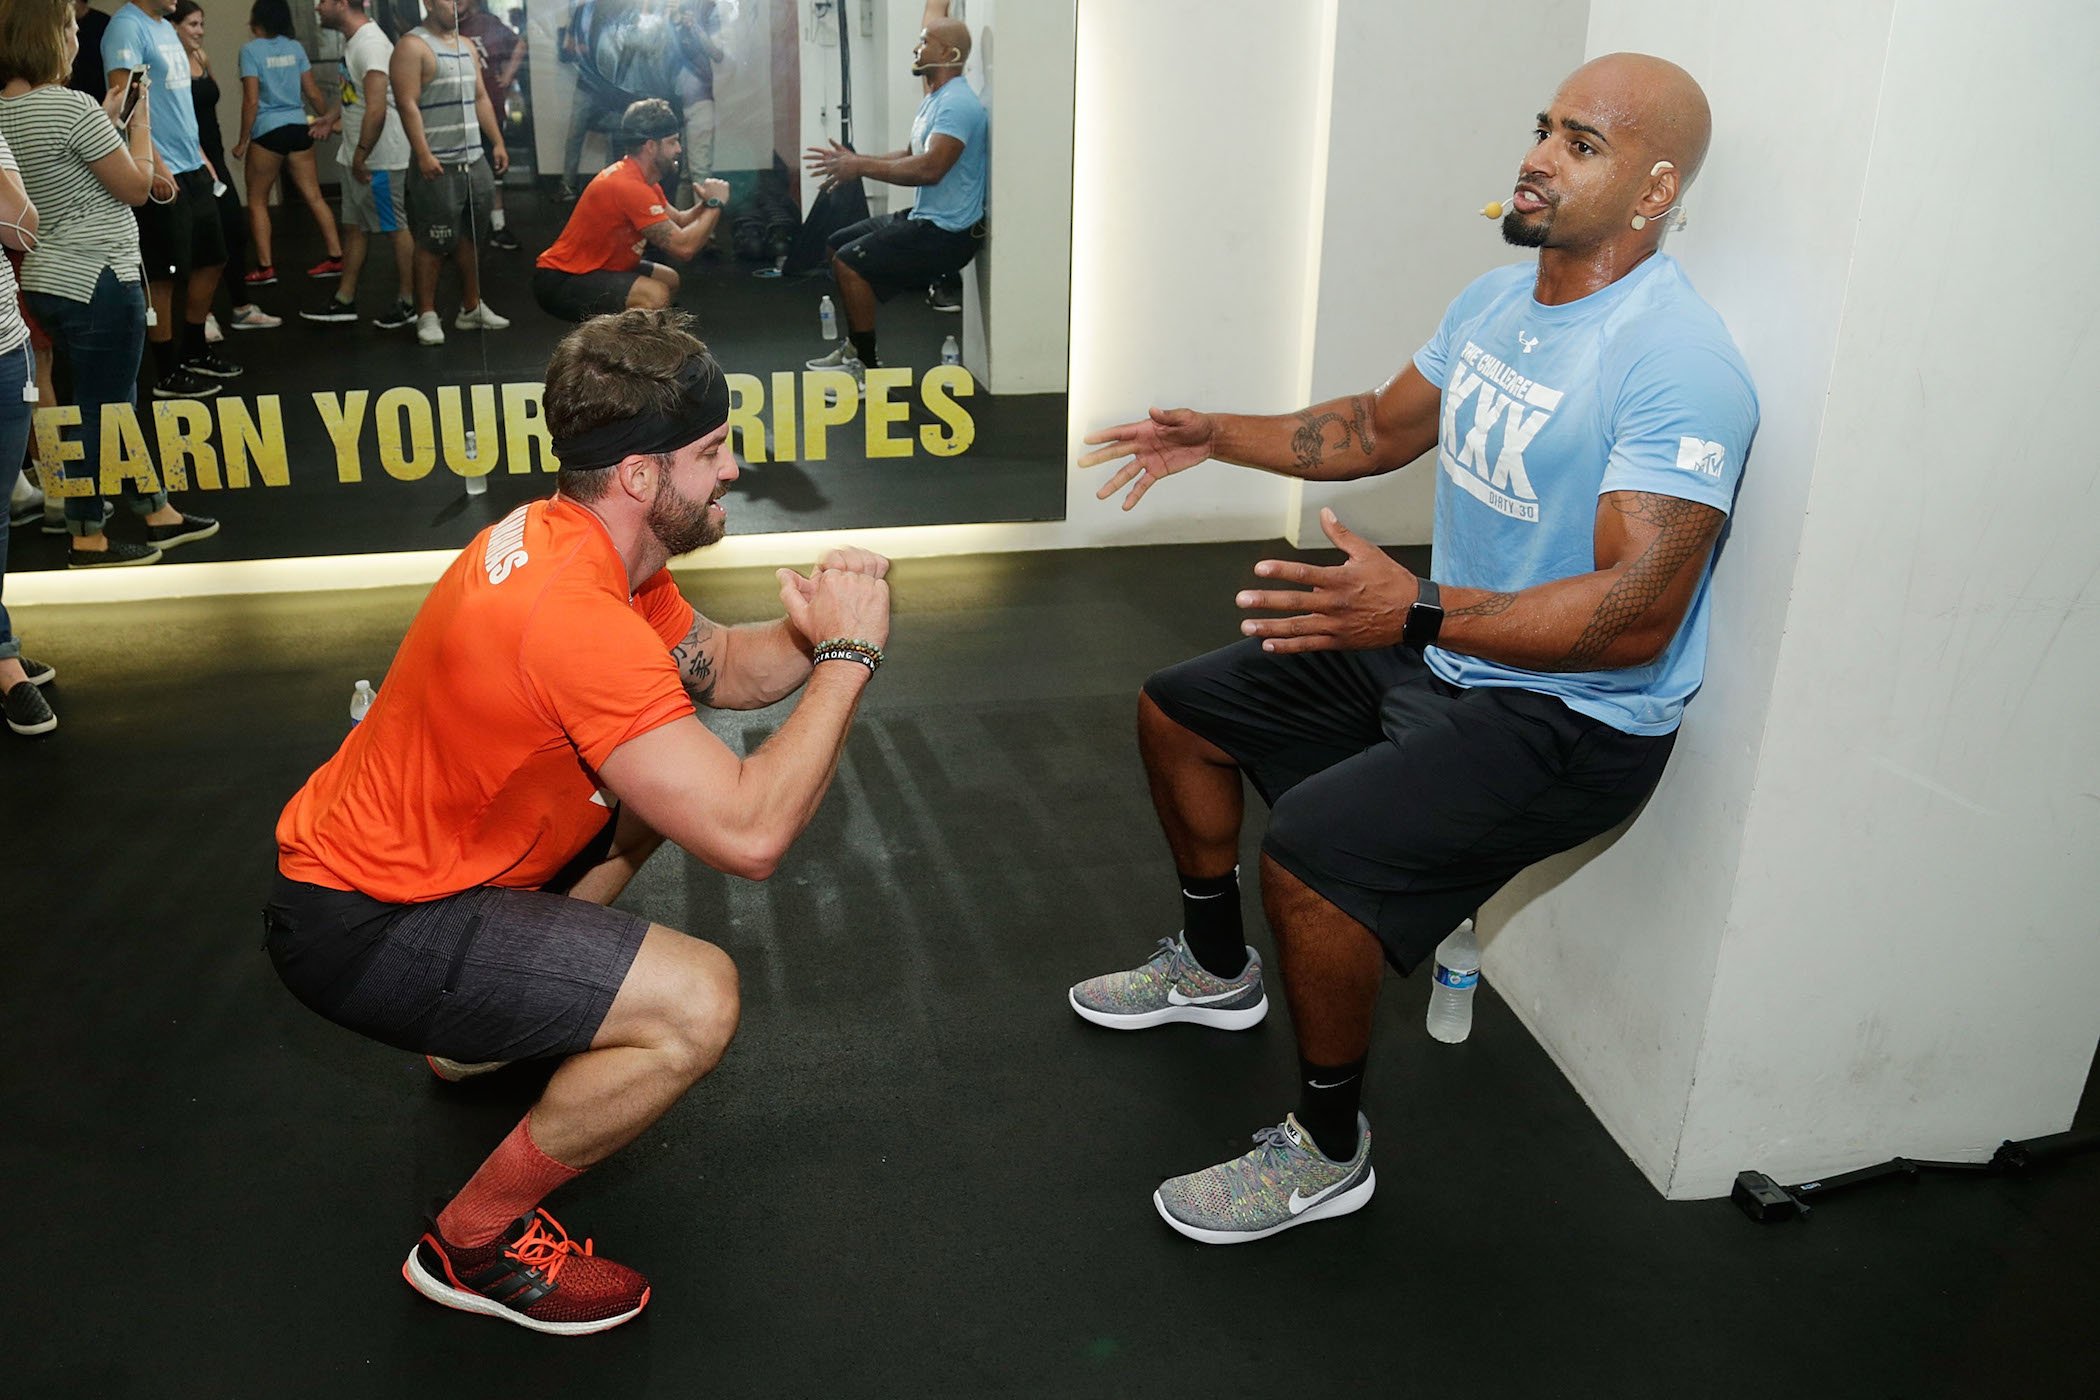 Johnny 'Bananas' Devenanzio and Darrell Taylor from MTV's 'The Challenge' training during 'The Challenge XXX': Ultimate Fan Experience 